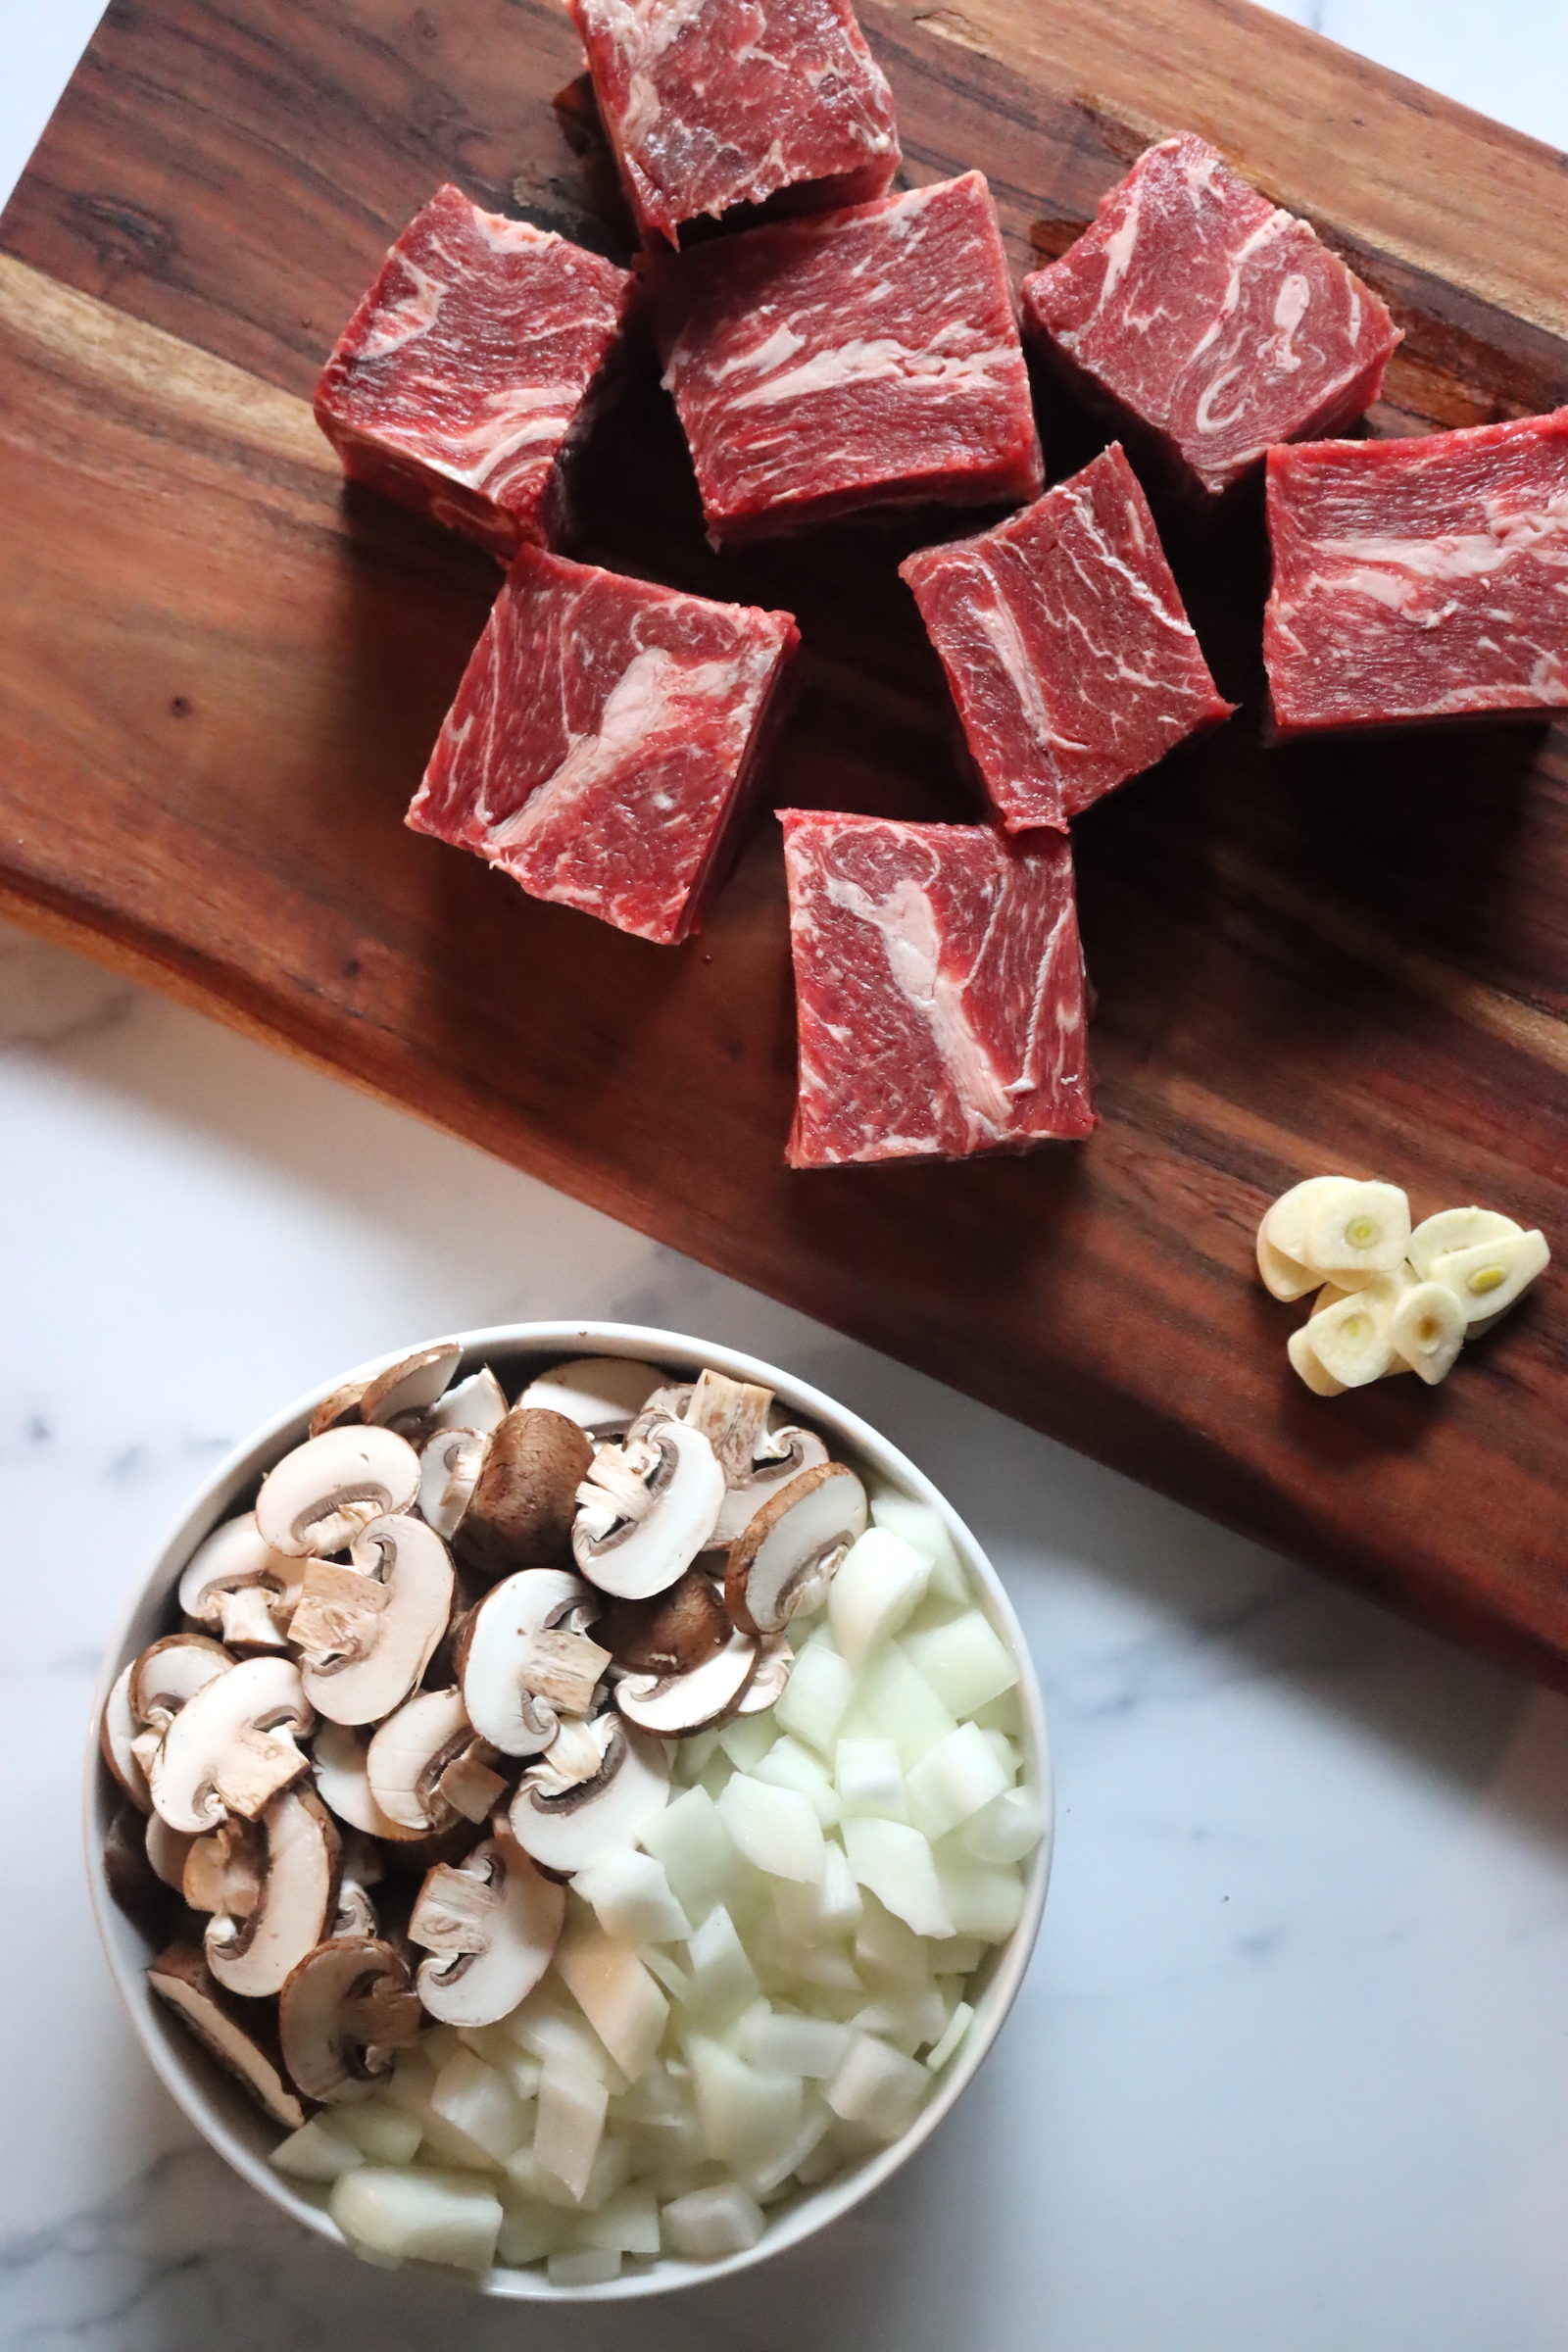 Ingredients for Canning Beef Stroganoff